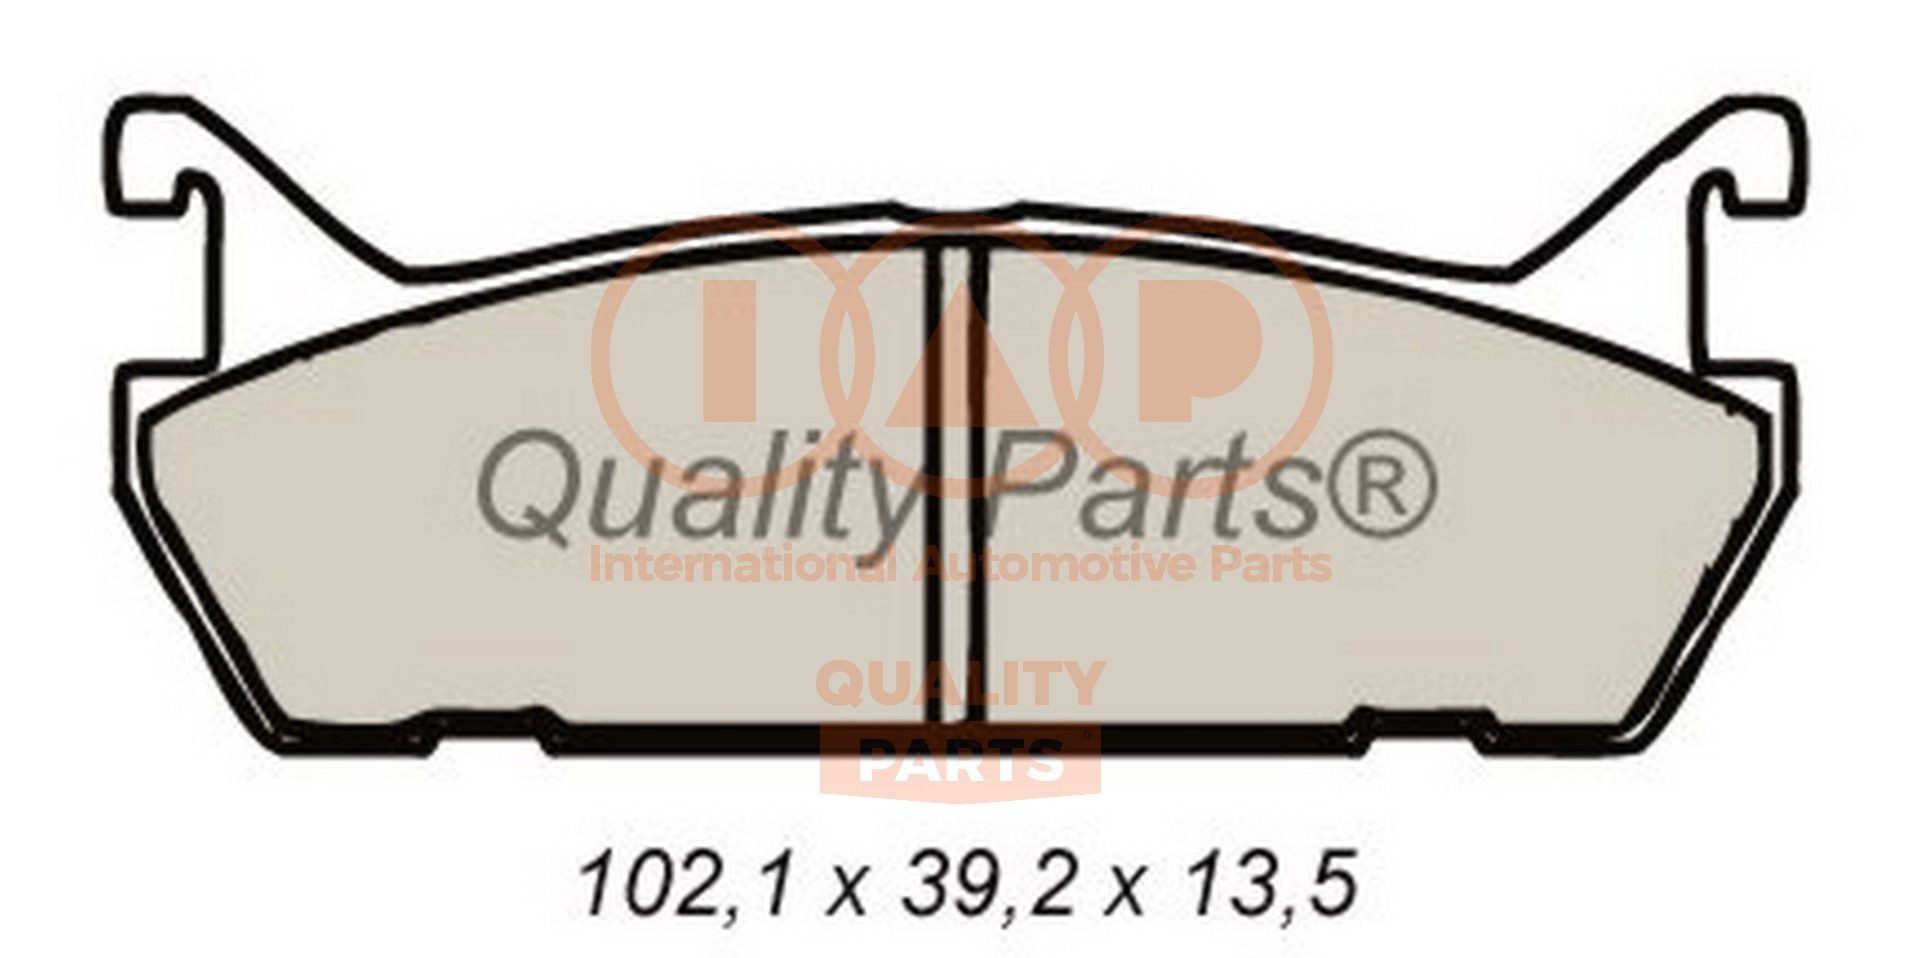 IAP QUALITY PARTS Rear Axle Height 1: 39,2mm, Width 1: 102,1mm, Thickness 1: 13,5mm Brake pads 704-11032 buy